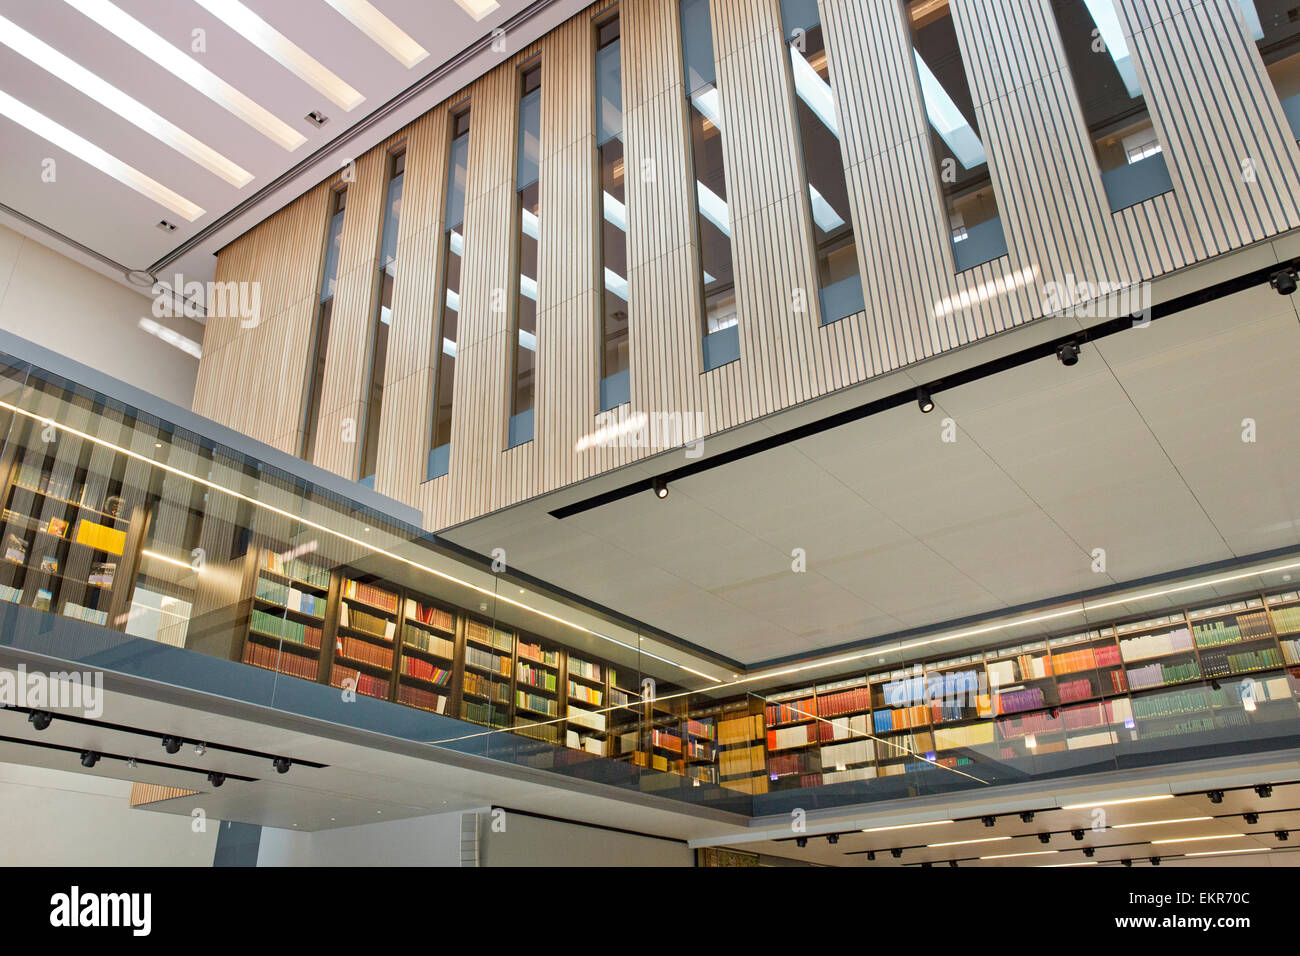 Bodleian Libraries new refurbished Weston Library at the University of Oxford Stock Photo